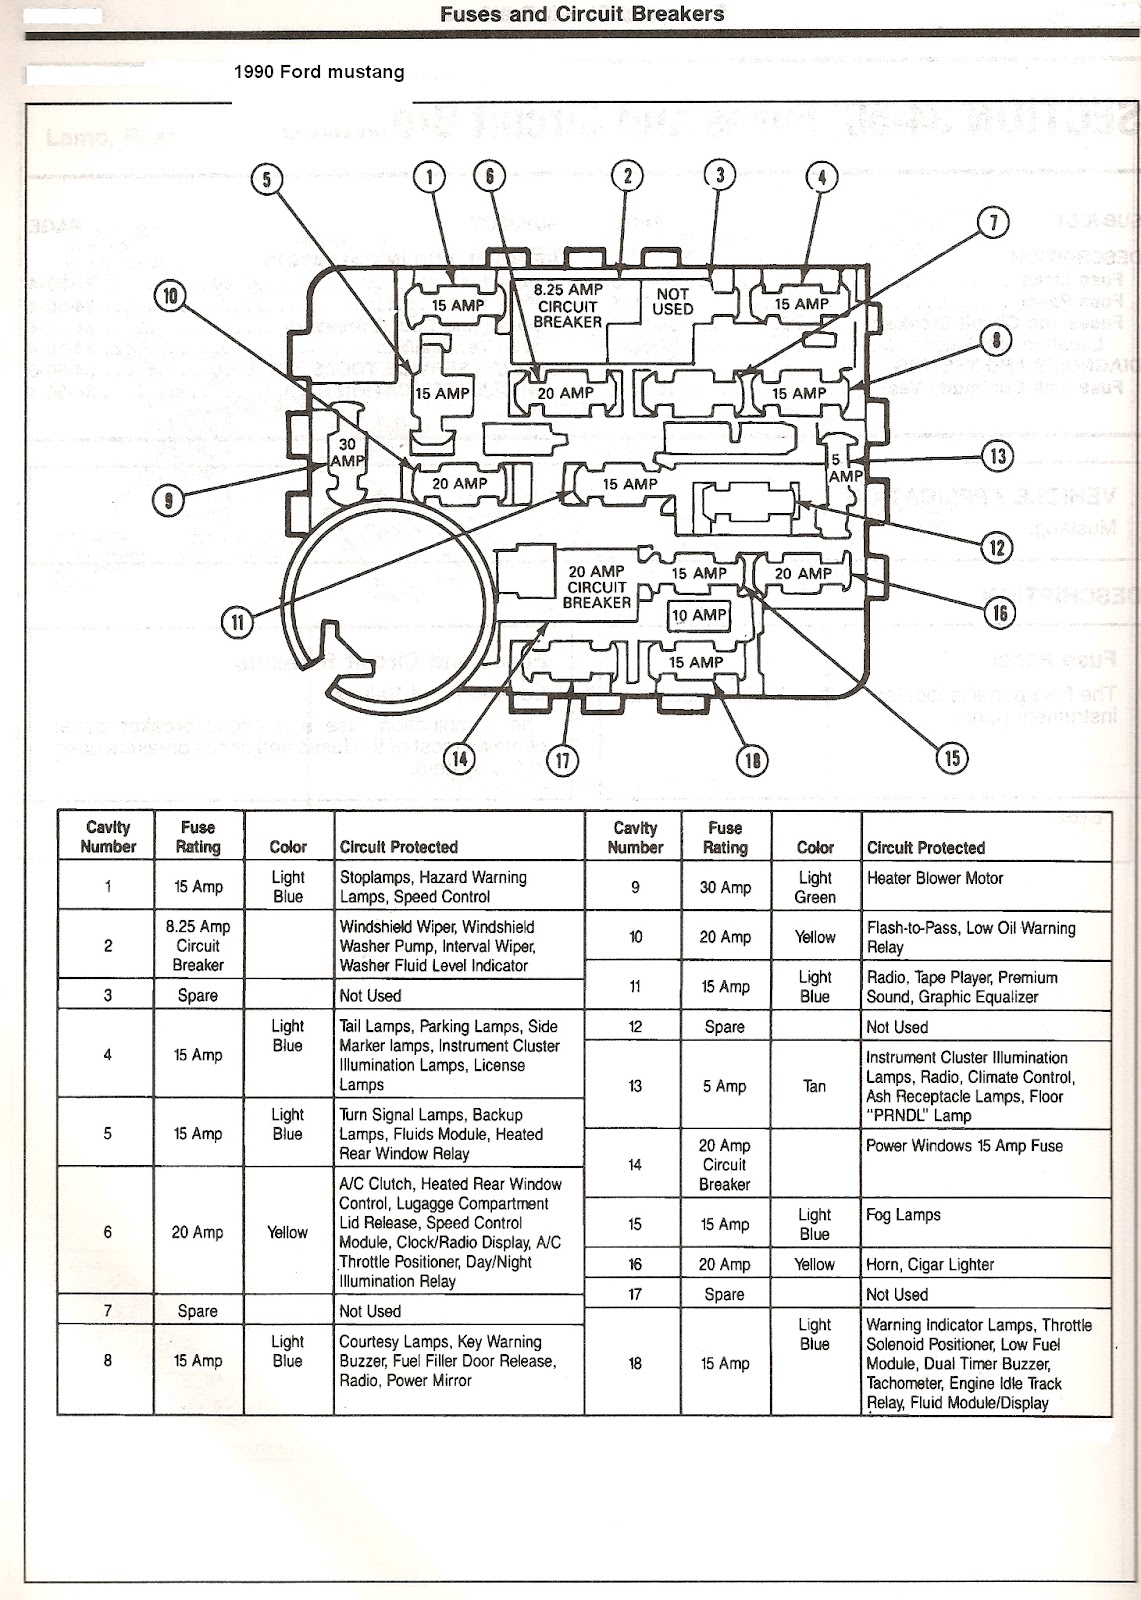 1986 Mustang Fuse Box Simple Guide About Wiring Diagram